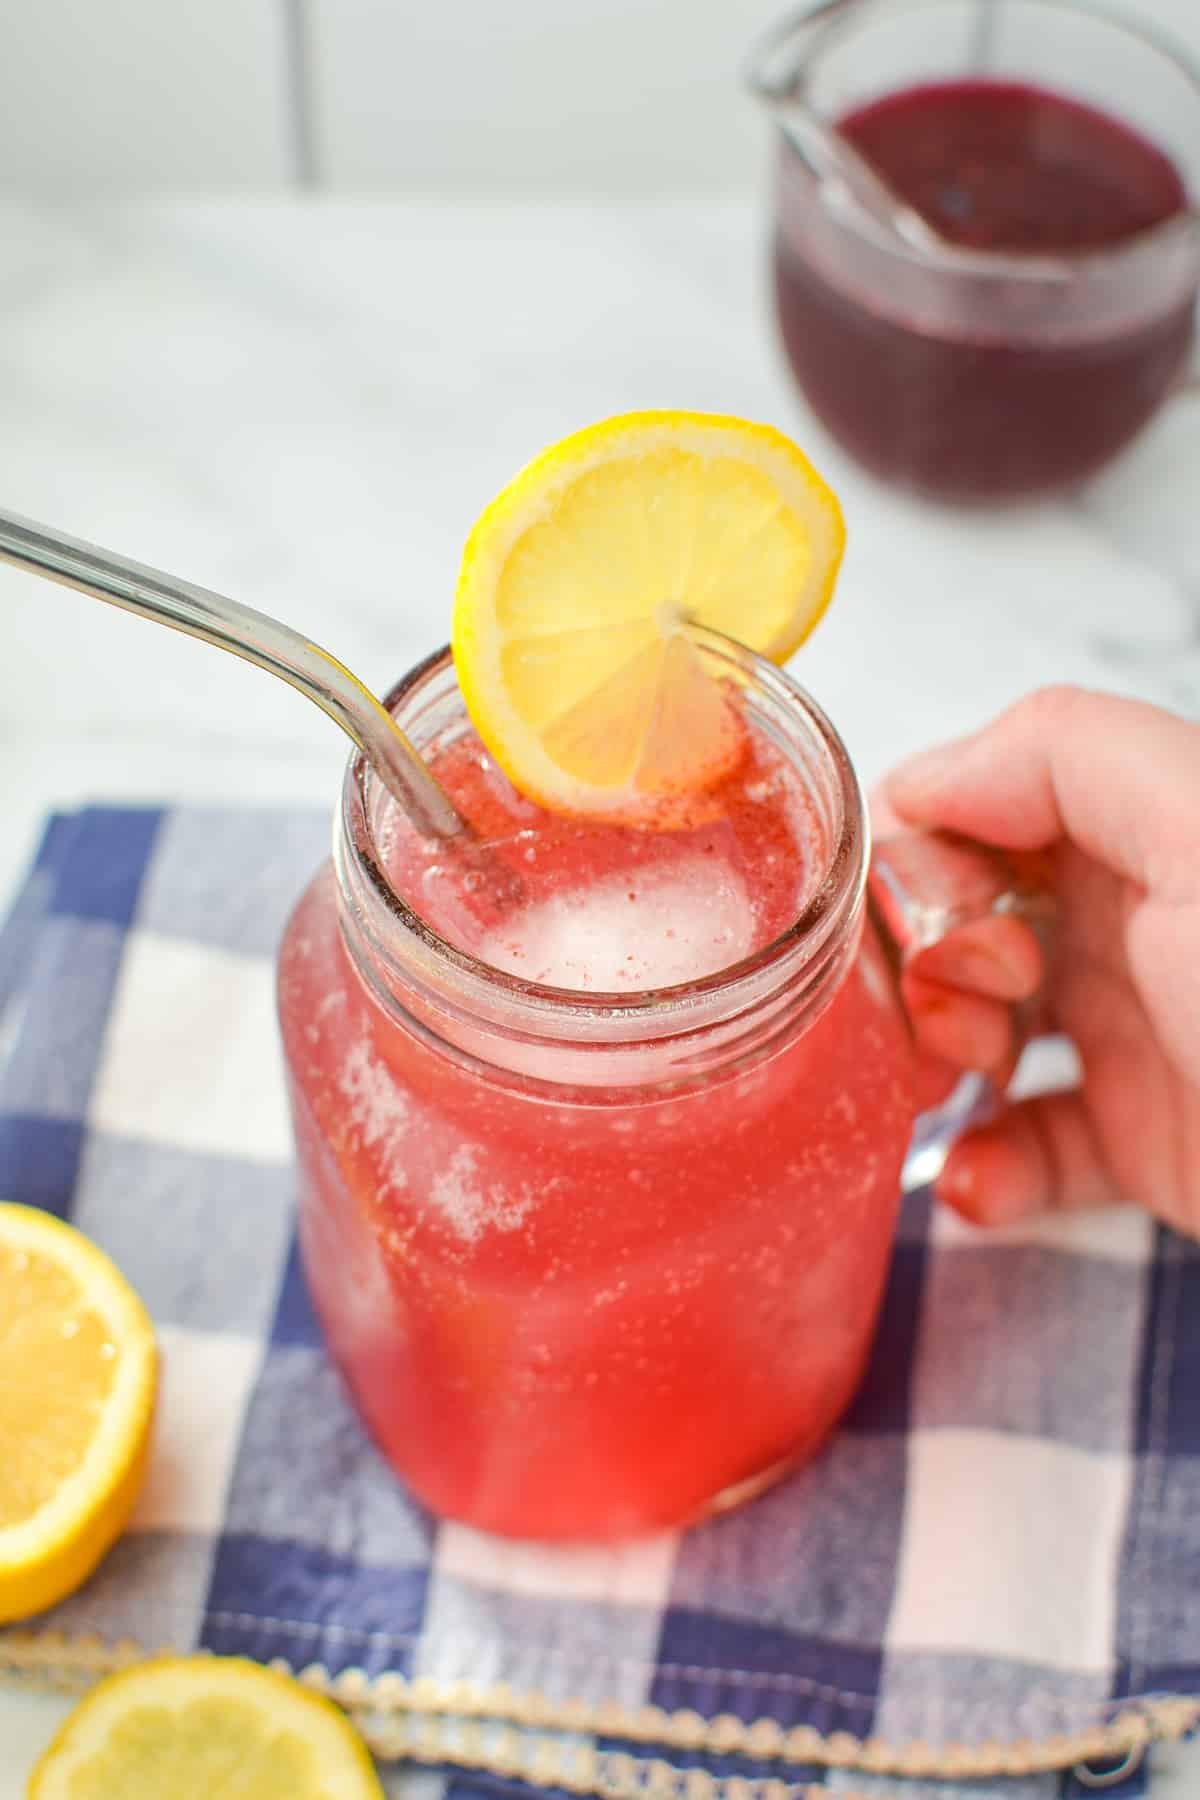 A glass jar filled with a blueberry cocktail and garnished with lemon.